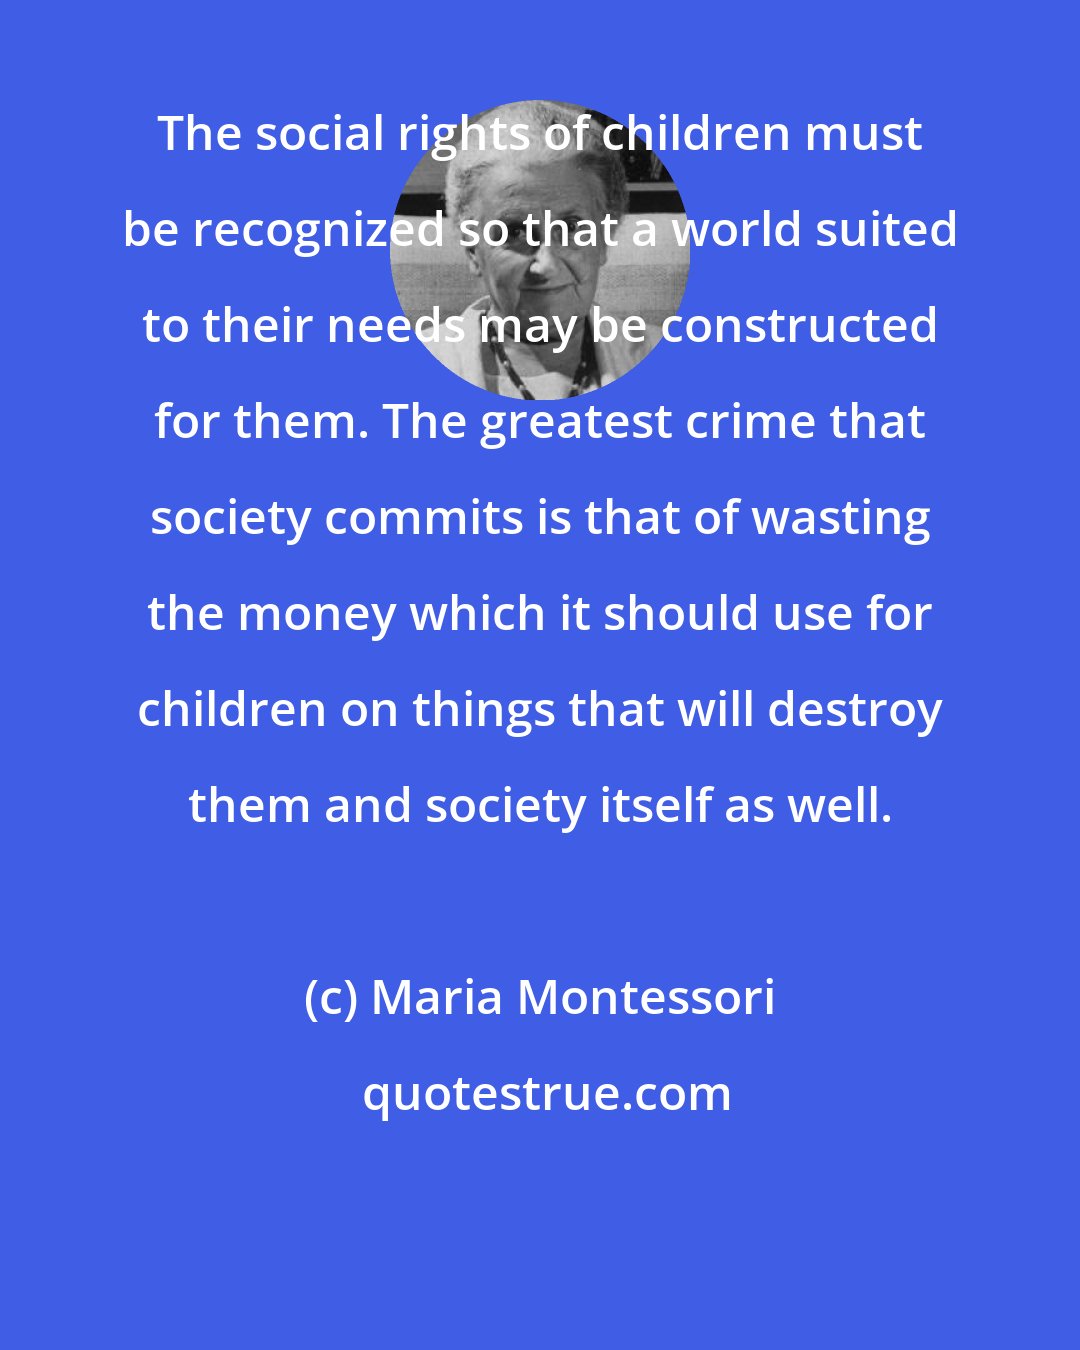 Maria Montessori: The social rights of children must be recognized so that a world suited to their needs may be constructed for them. The greatest crime that society commits is that of wasting the money which it should use for children on things that will destroy them and society itself as well.